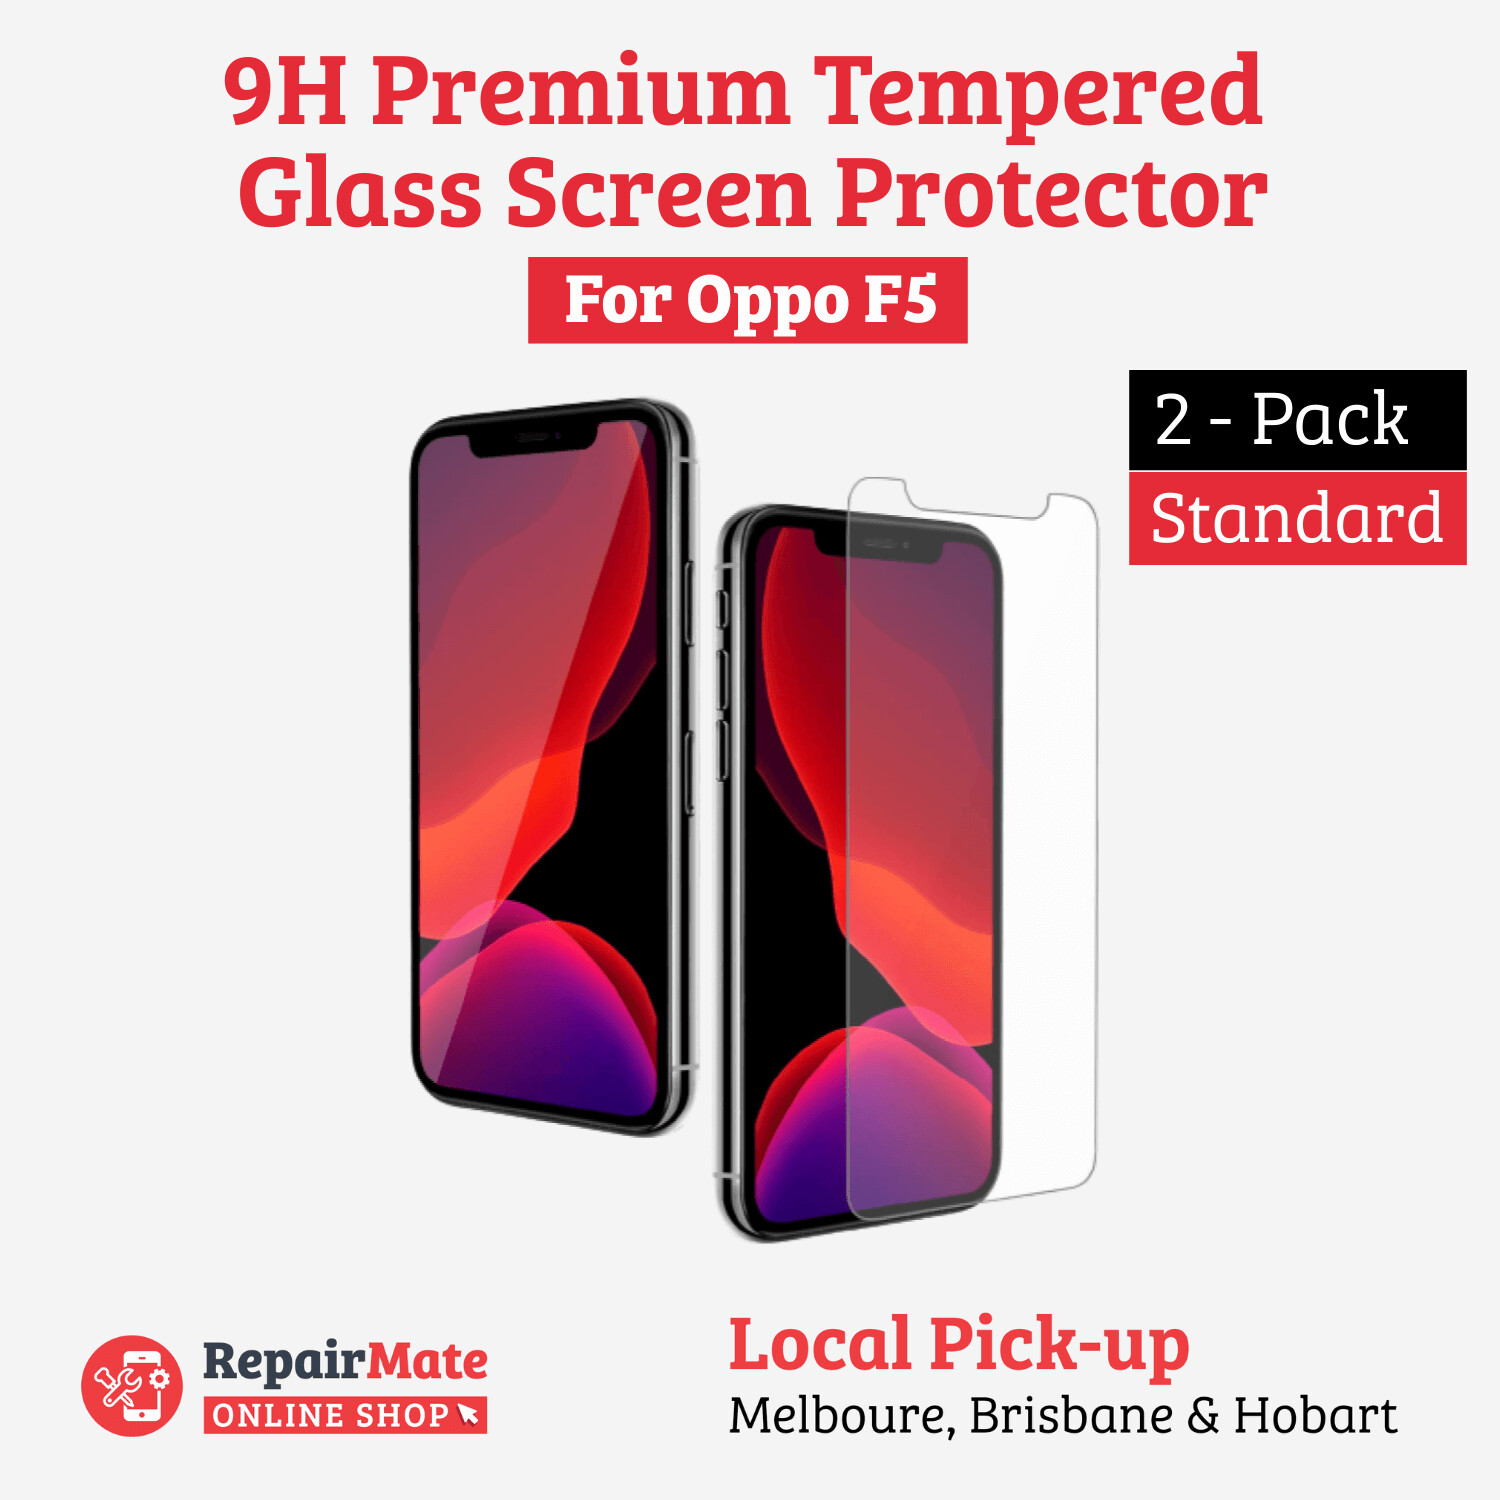 Oppo F5 9H Premium Tempered Glass Screen Protector [2 Pack]